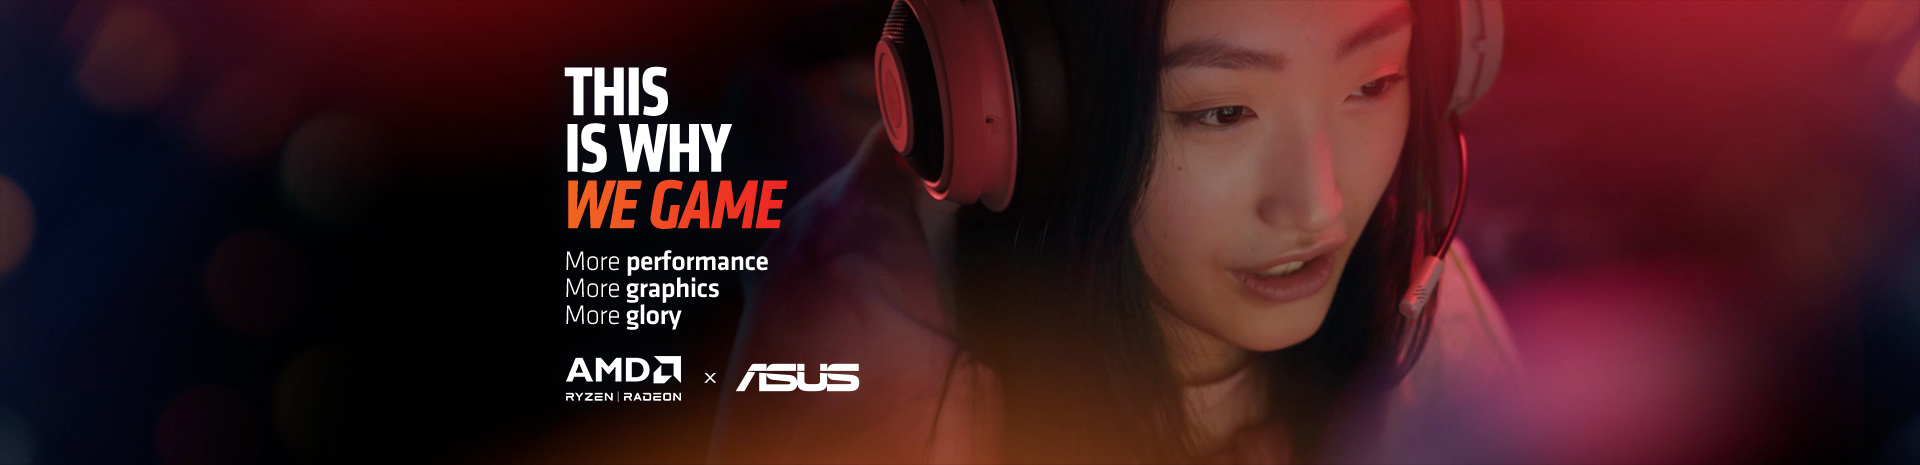 Promotional graphic for gaming with a slogan, highlighting performance and graphics, including AMD and ASUS logos, with a gaming headphone visible.